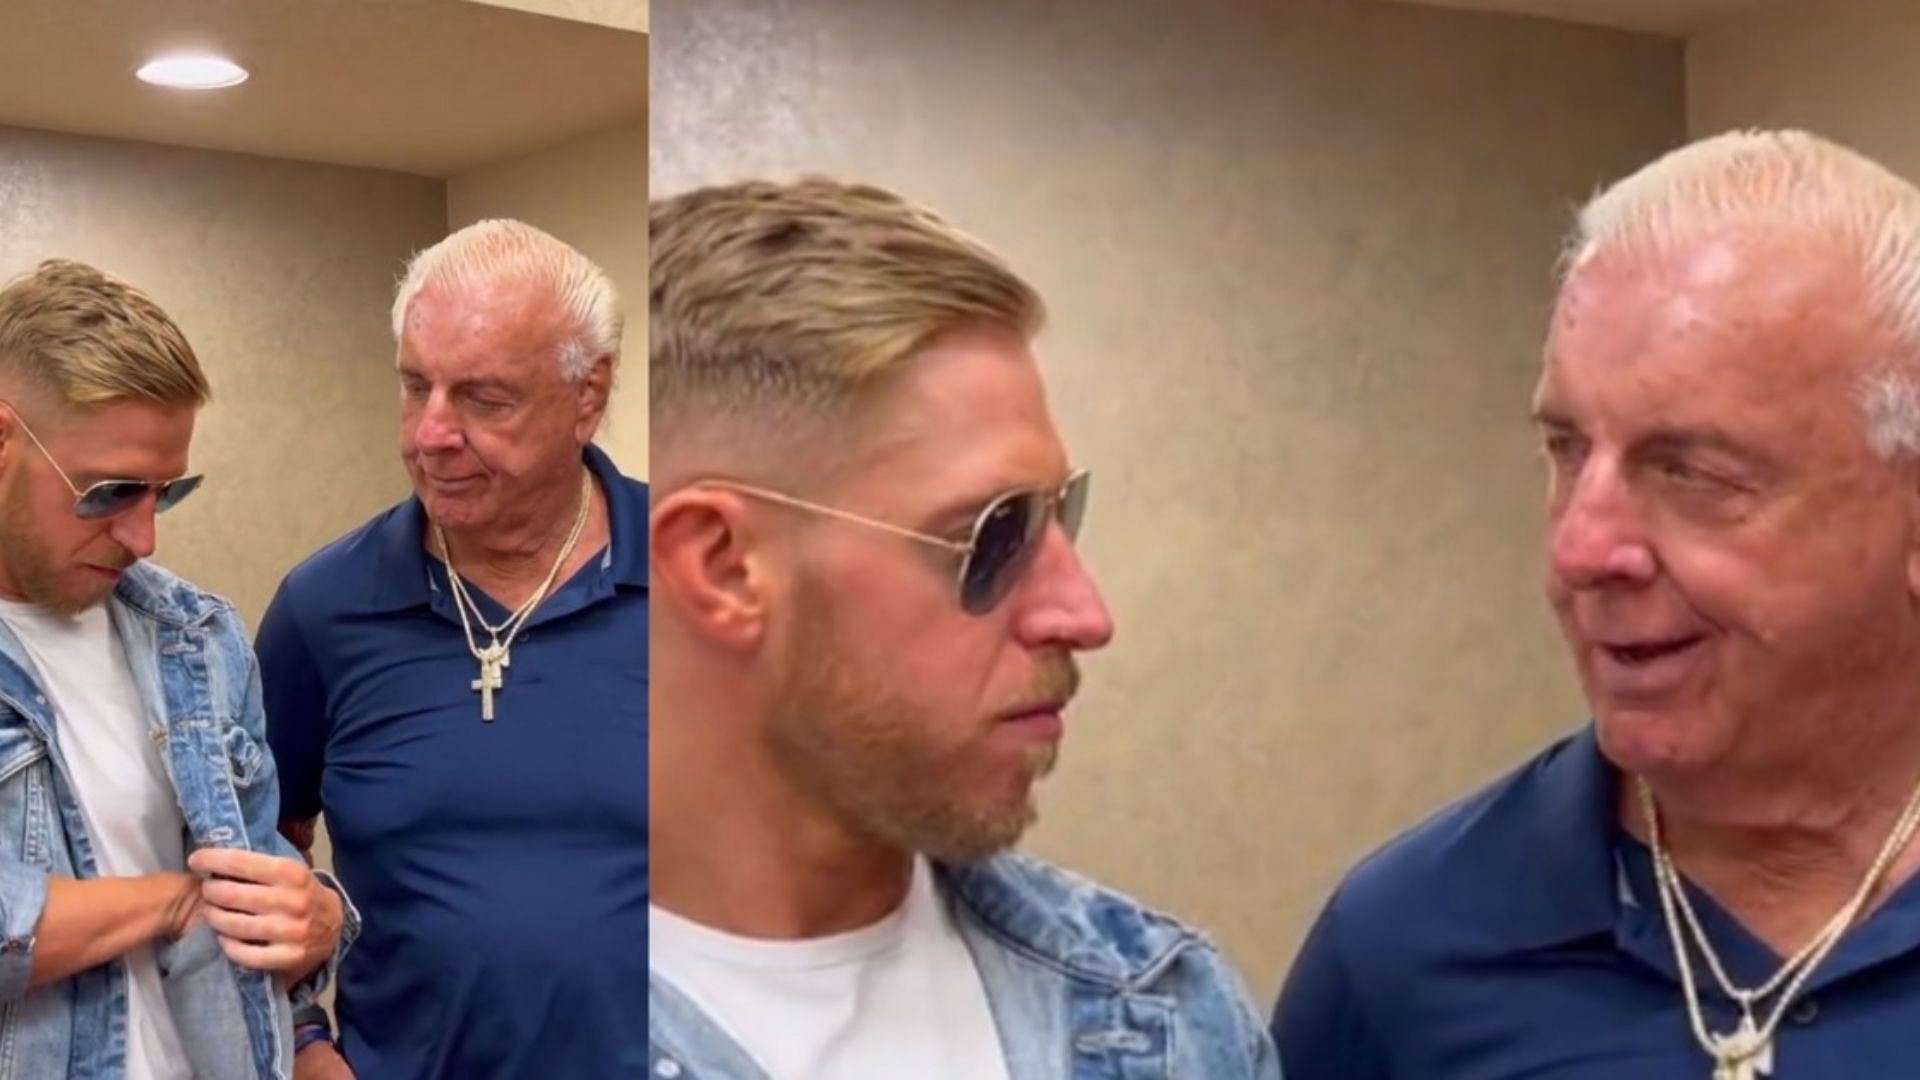 Are Ric Flair and Orange Cassidy friends behind the scenes?